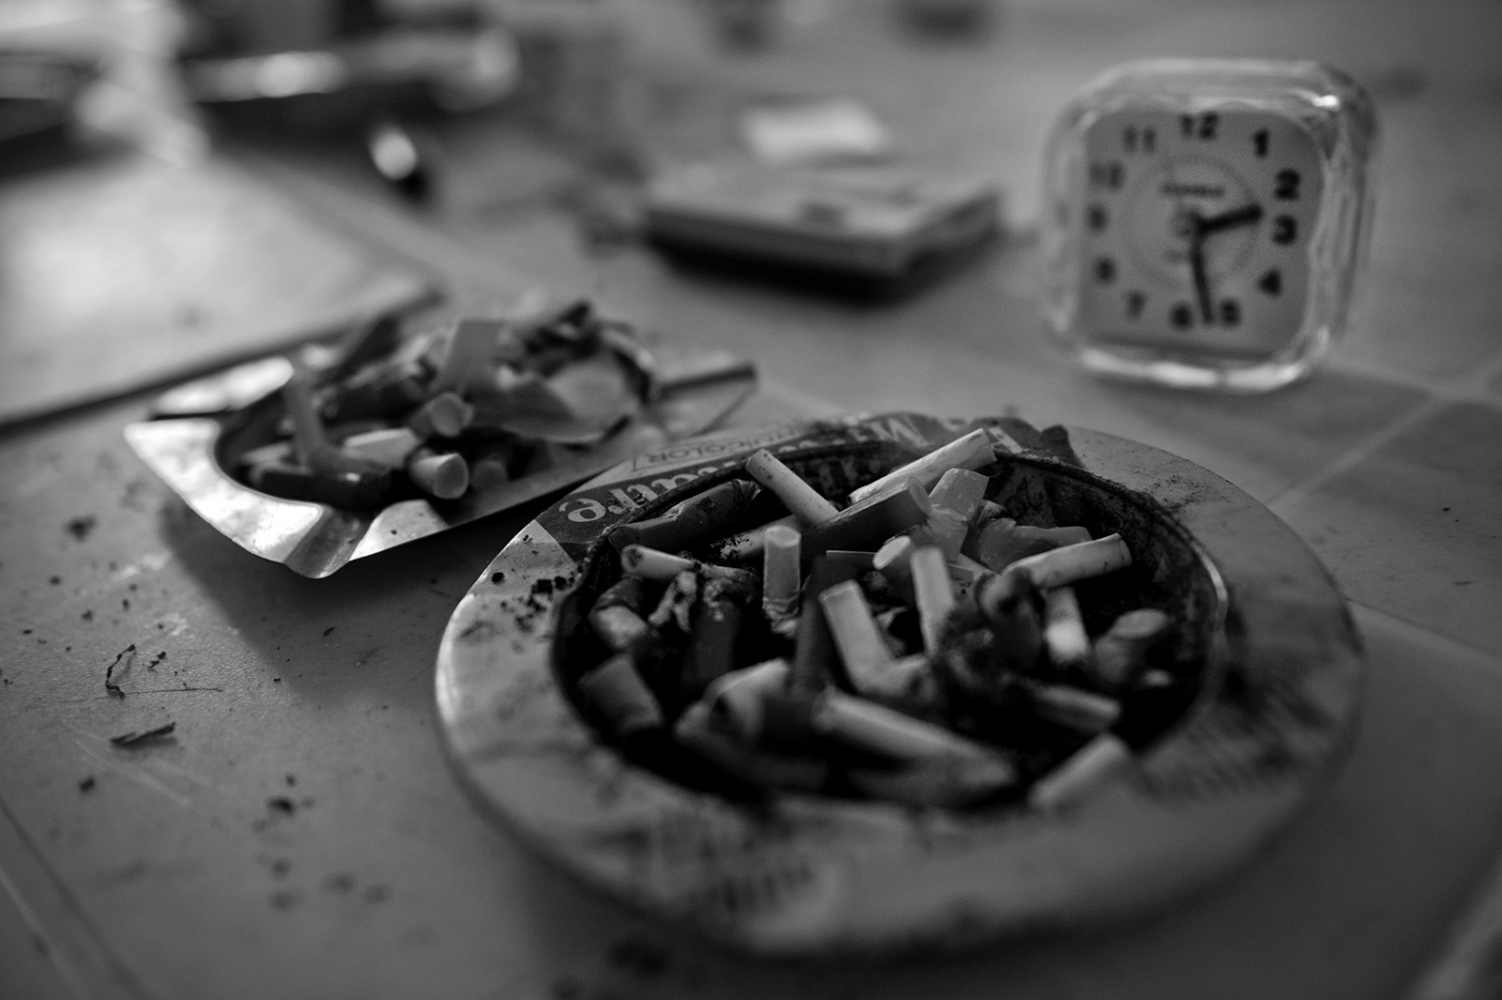 Side effects -  An ashtray full of cigarette butts. Alfio smokes all day...